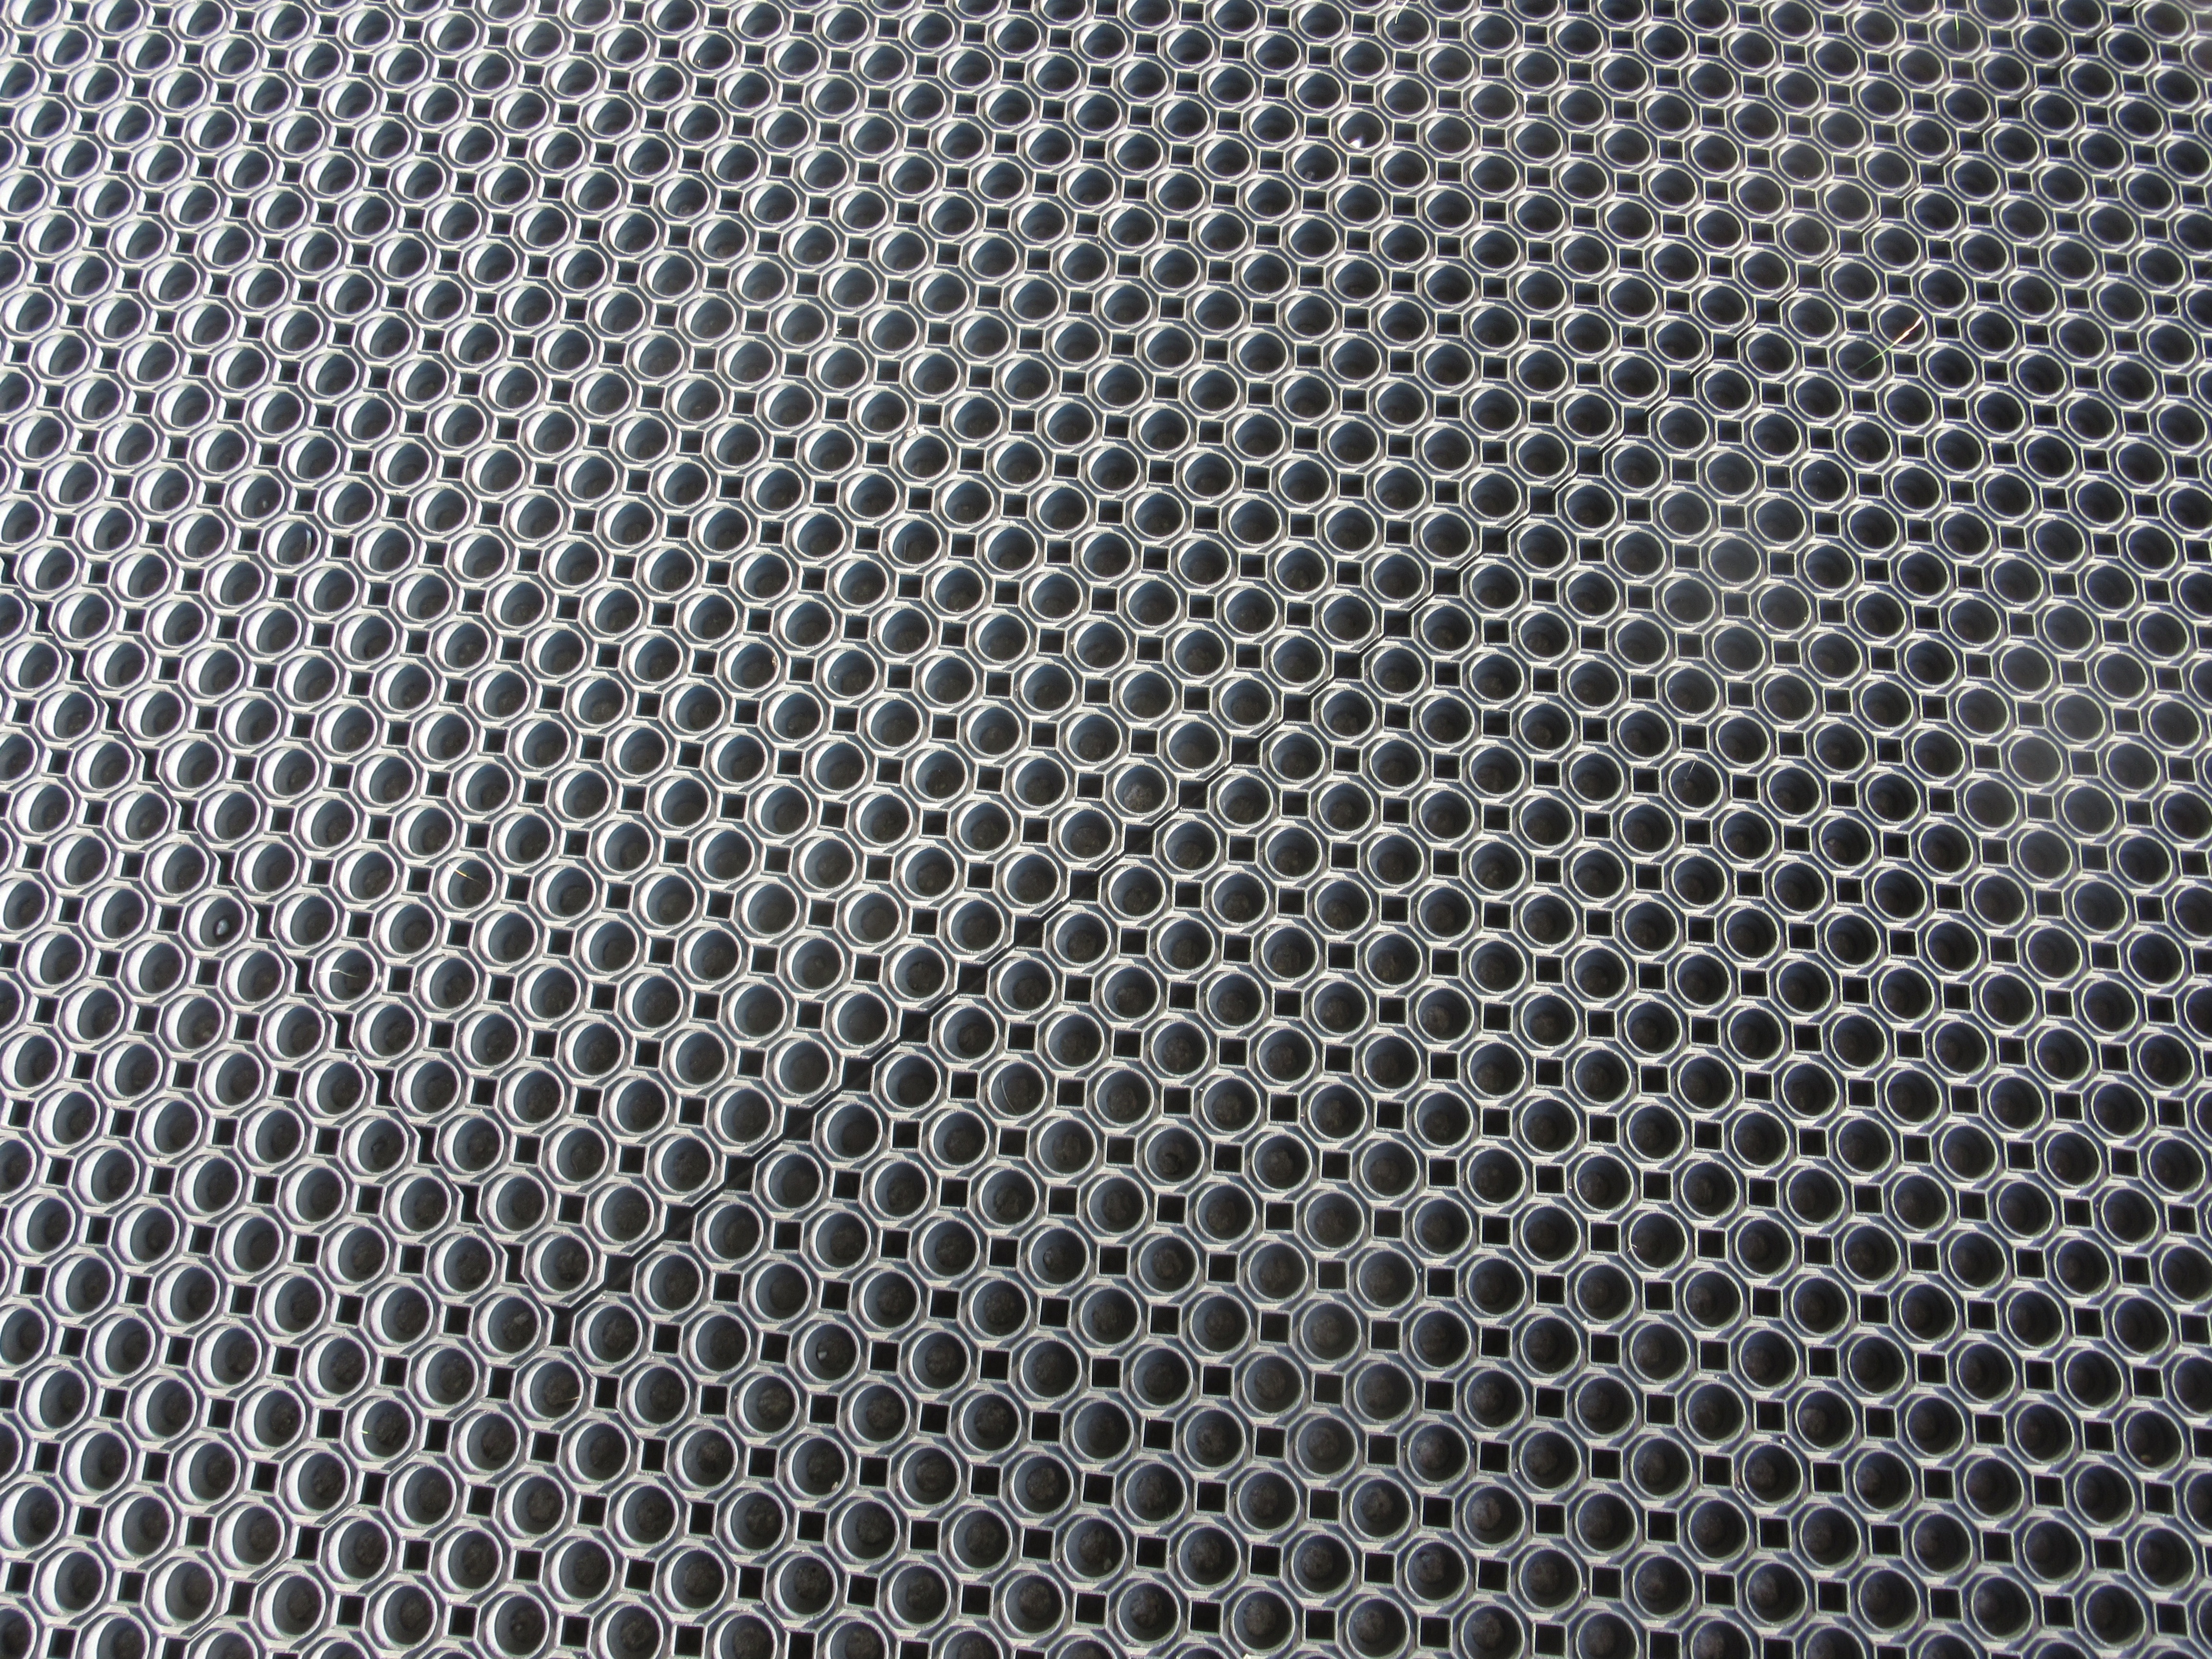 Rubber, Grid, Regularly, Floor Mat, backgrounds, silver colored